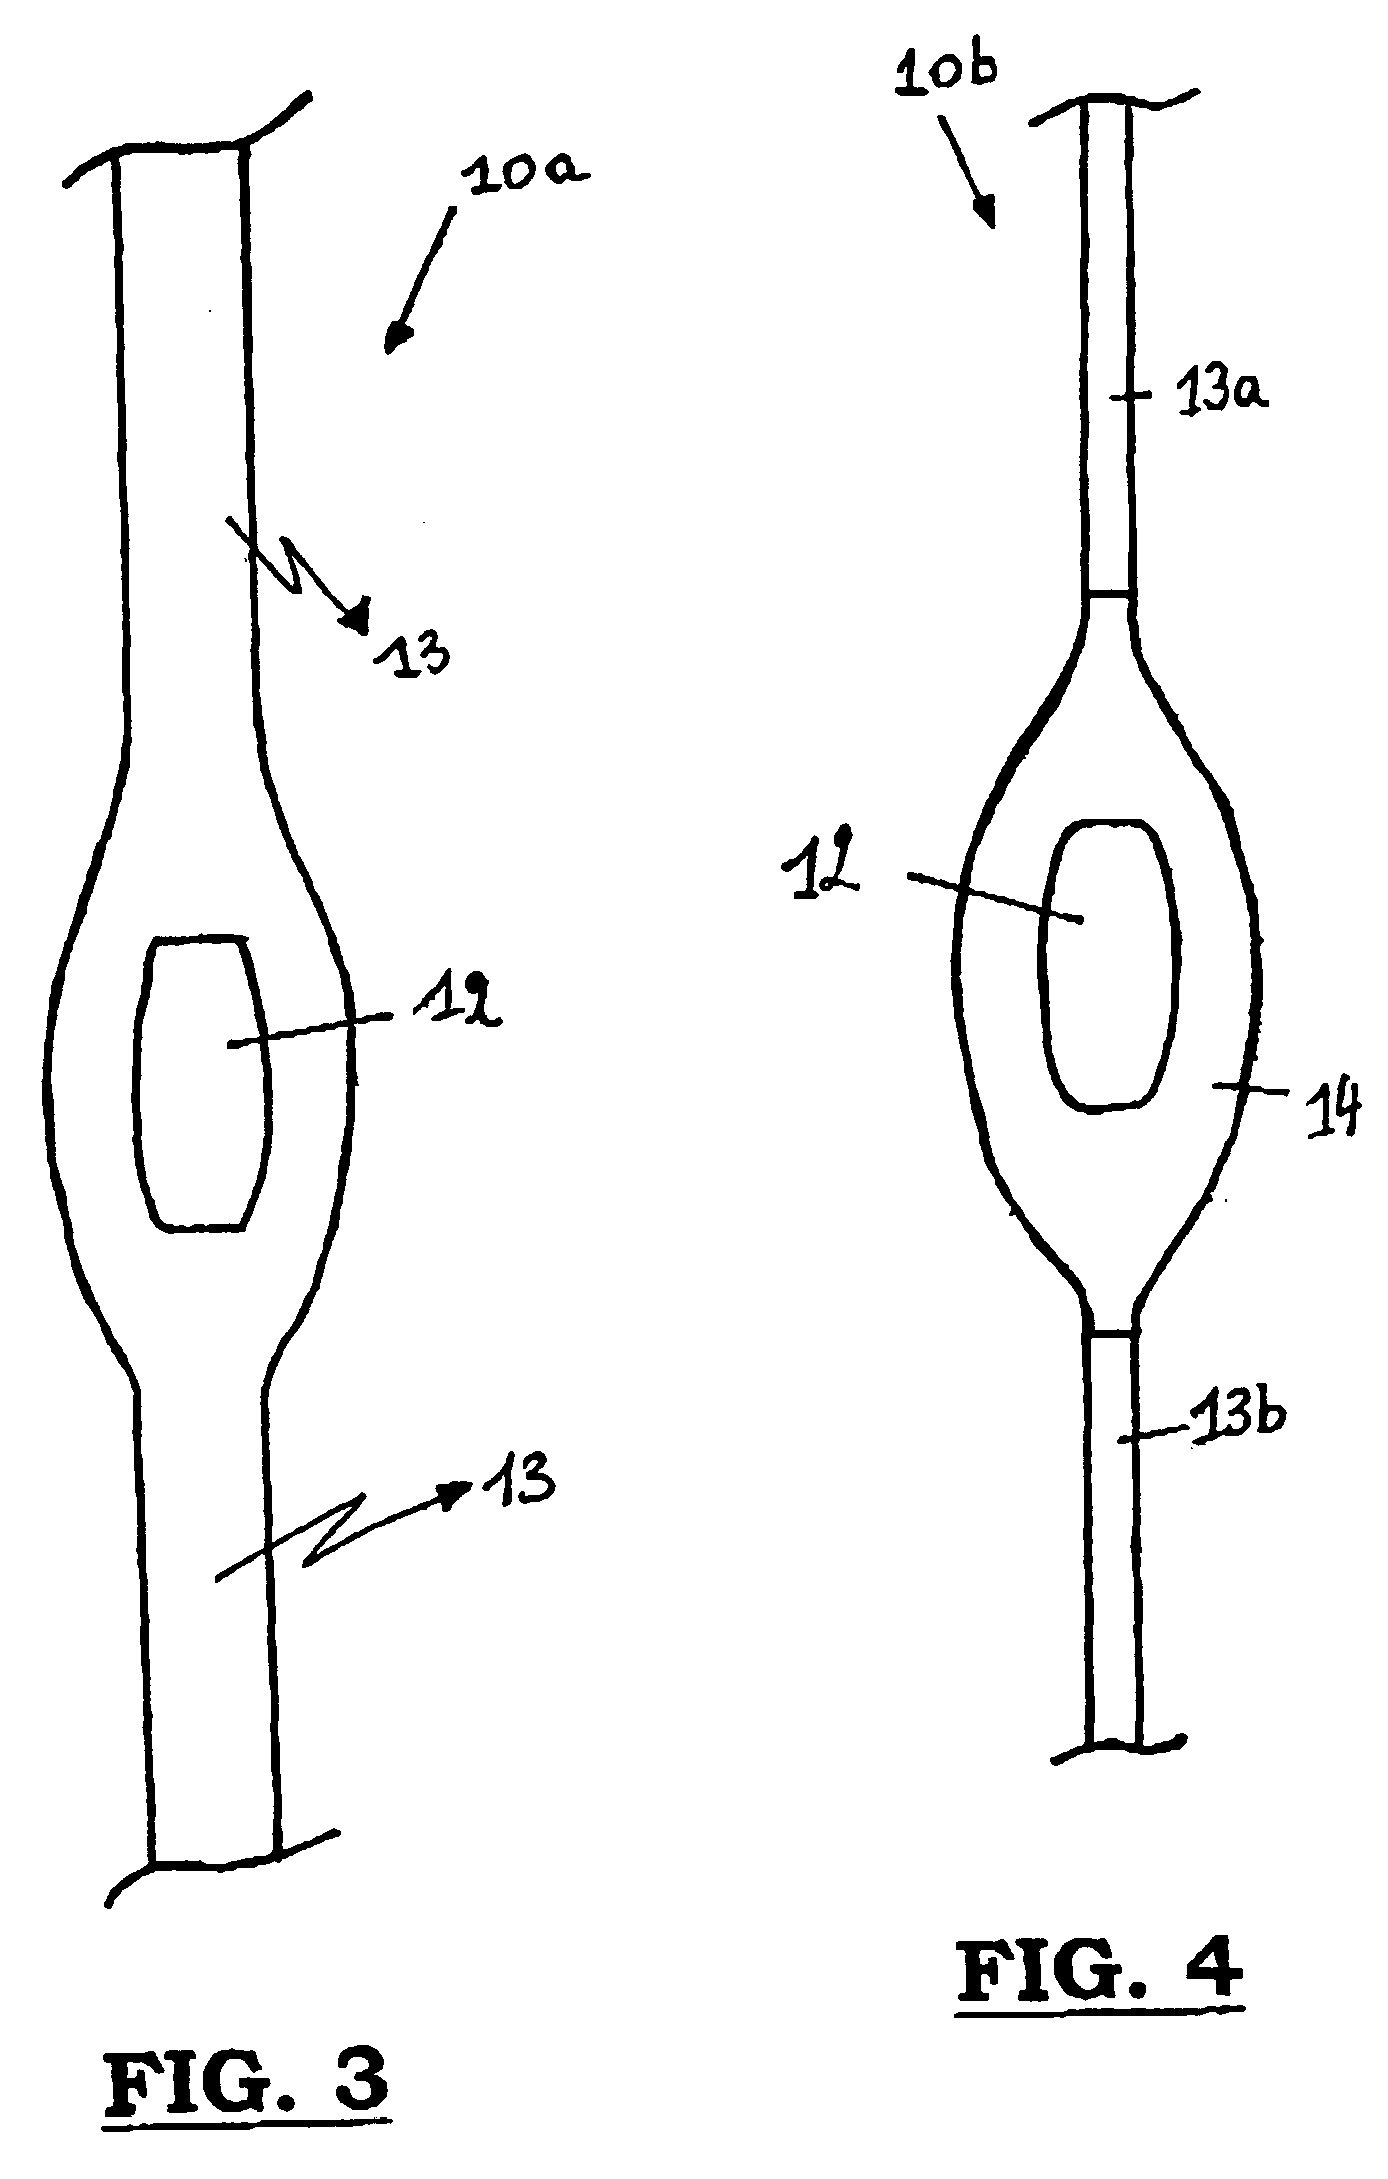 Method for manufacturing components consisting of one piece which appear in a weaving machine